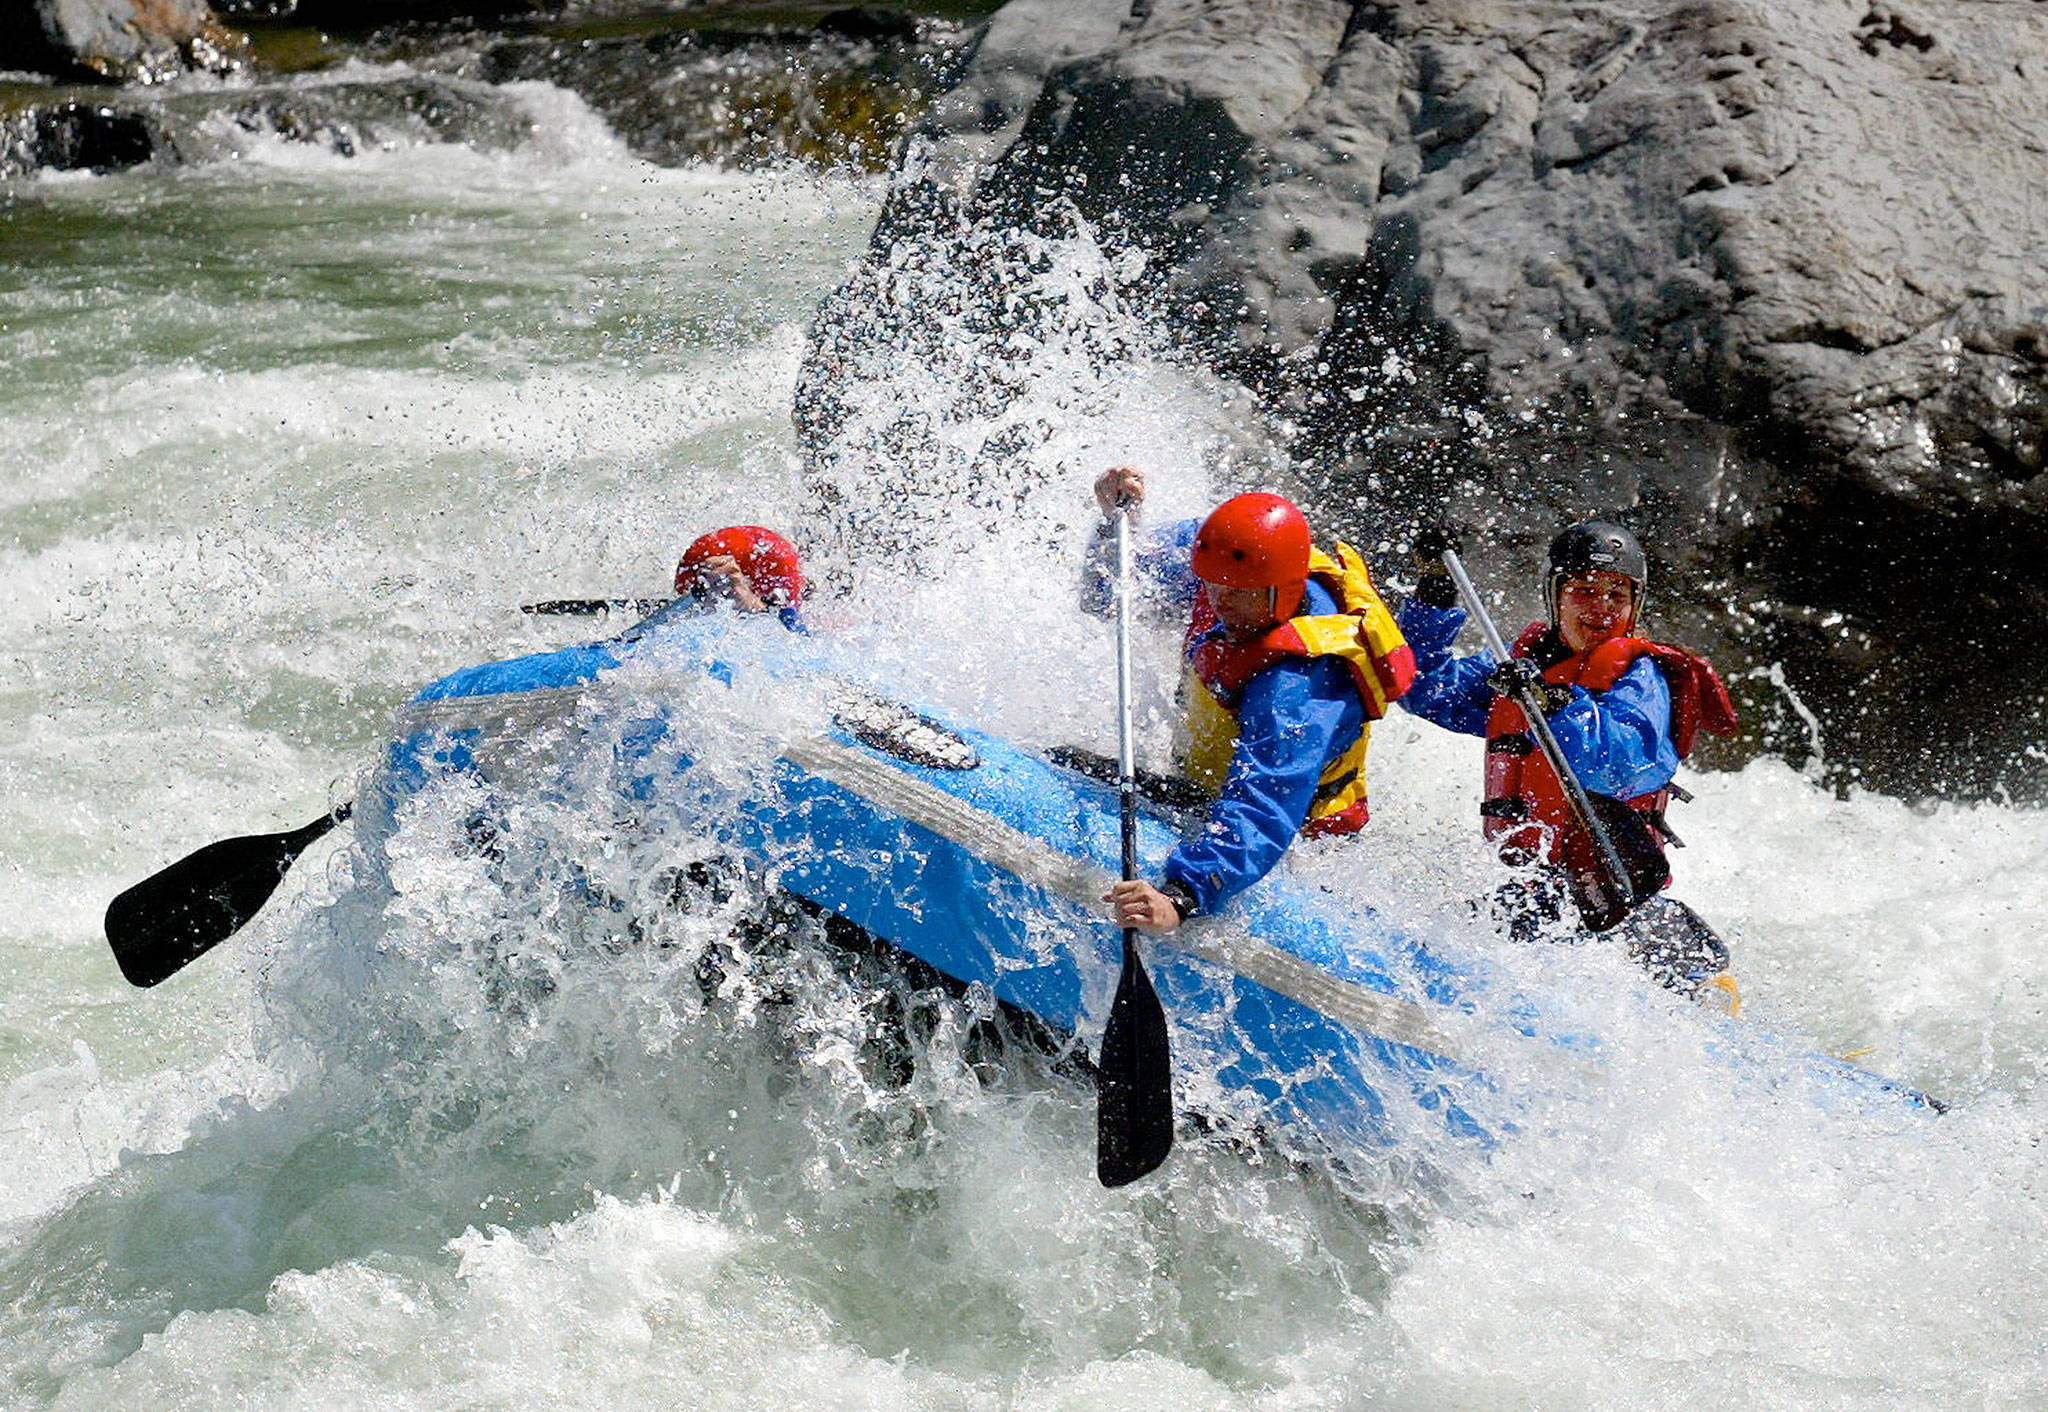 Rafters enjoy a sunny day riding the spring melt through Boulder Drop on the Skykomish river near Index. A countywide effort is underway to promote and enhance water trails to the Skykomish, Snohomish and Snoqualamie rivers. (Michael O’Leary / Herald file)